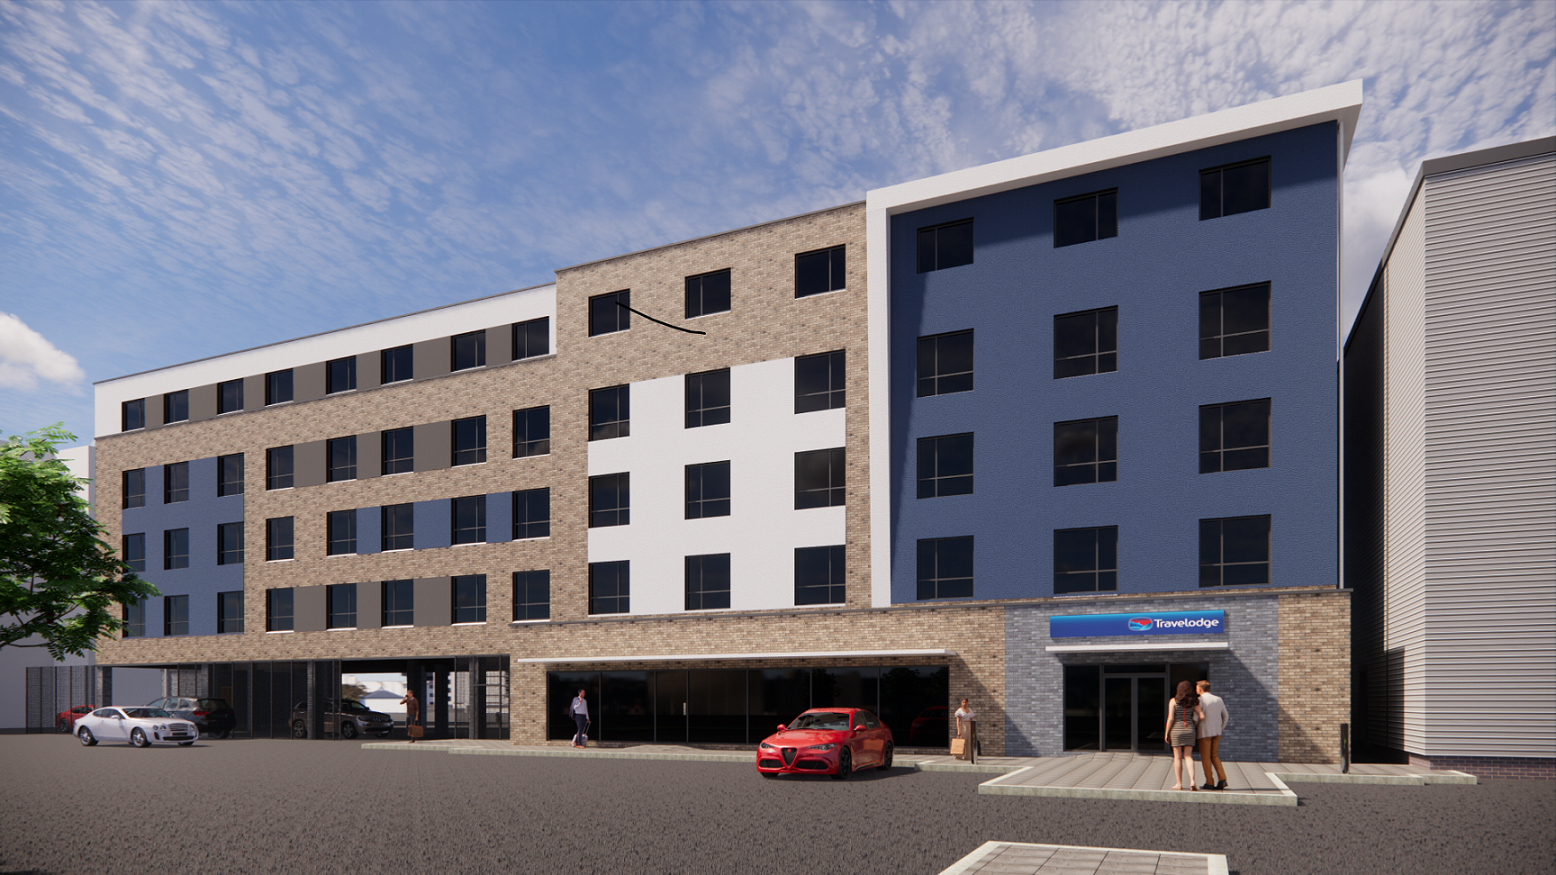 Planning result for Ipswich Travelodge